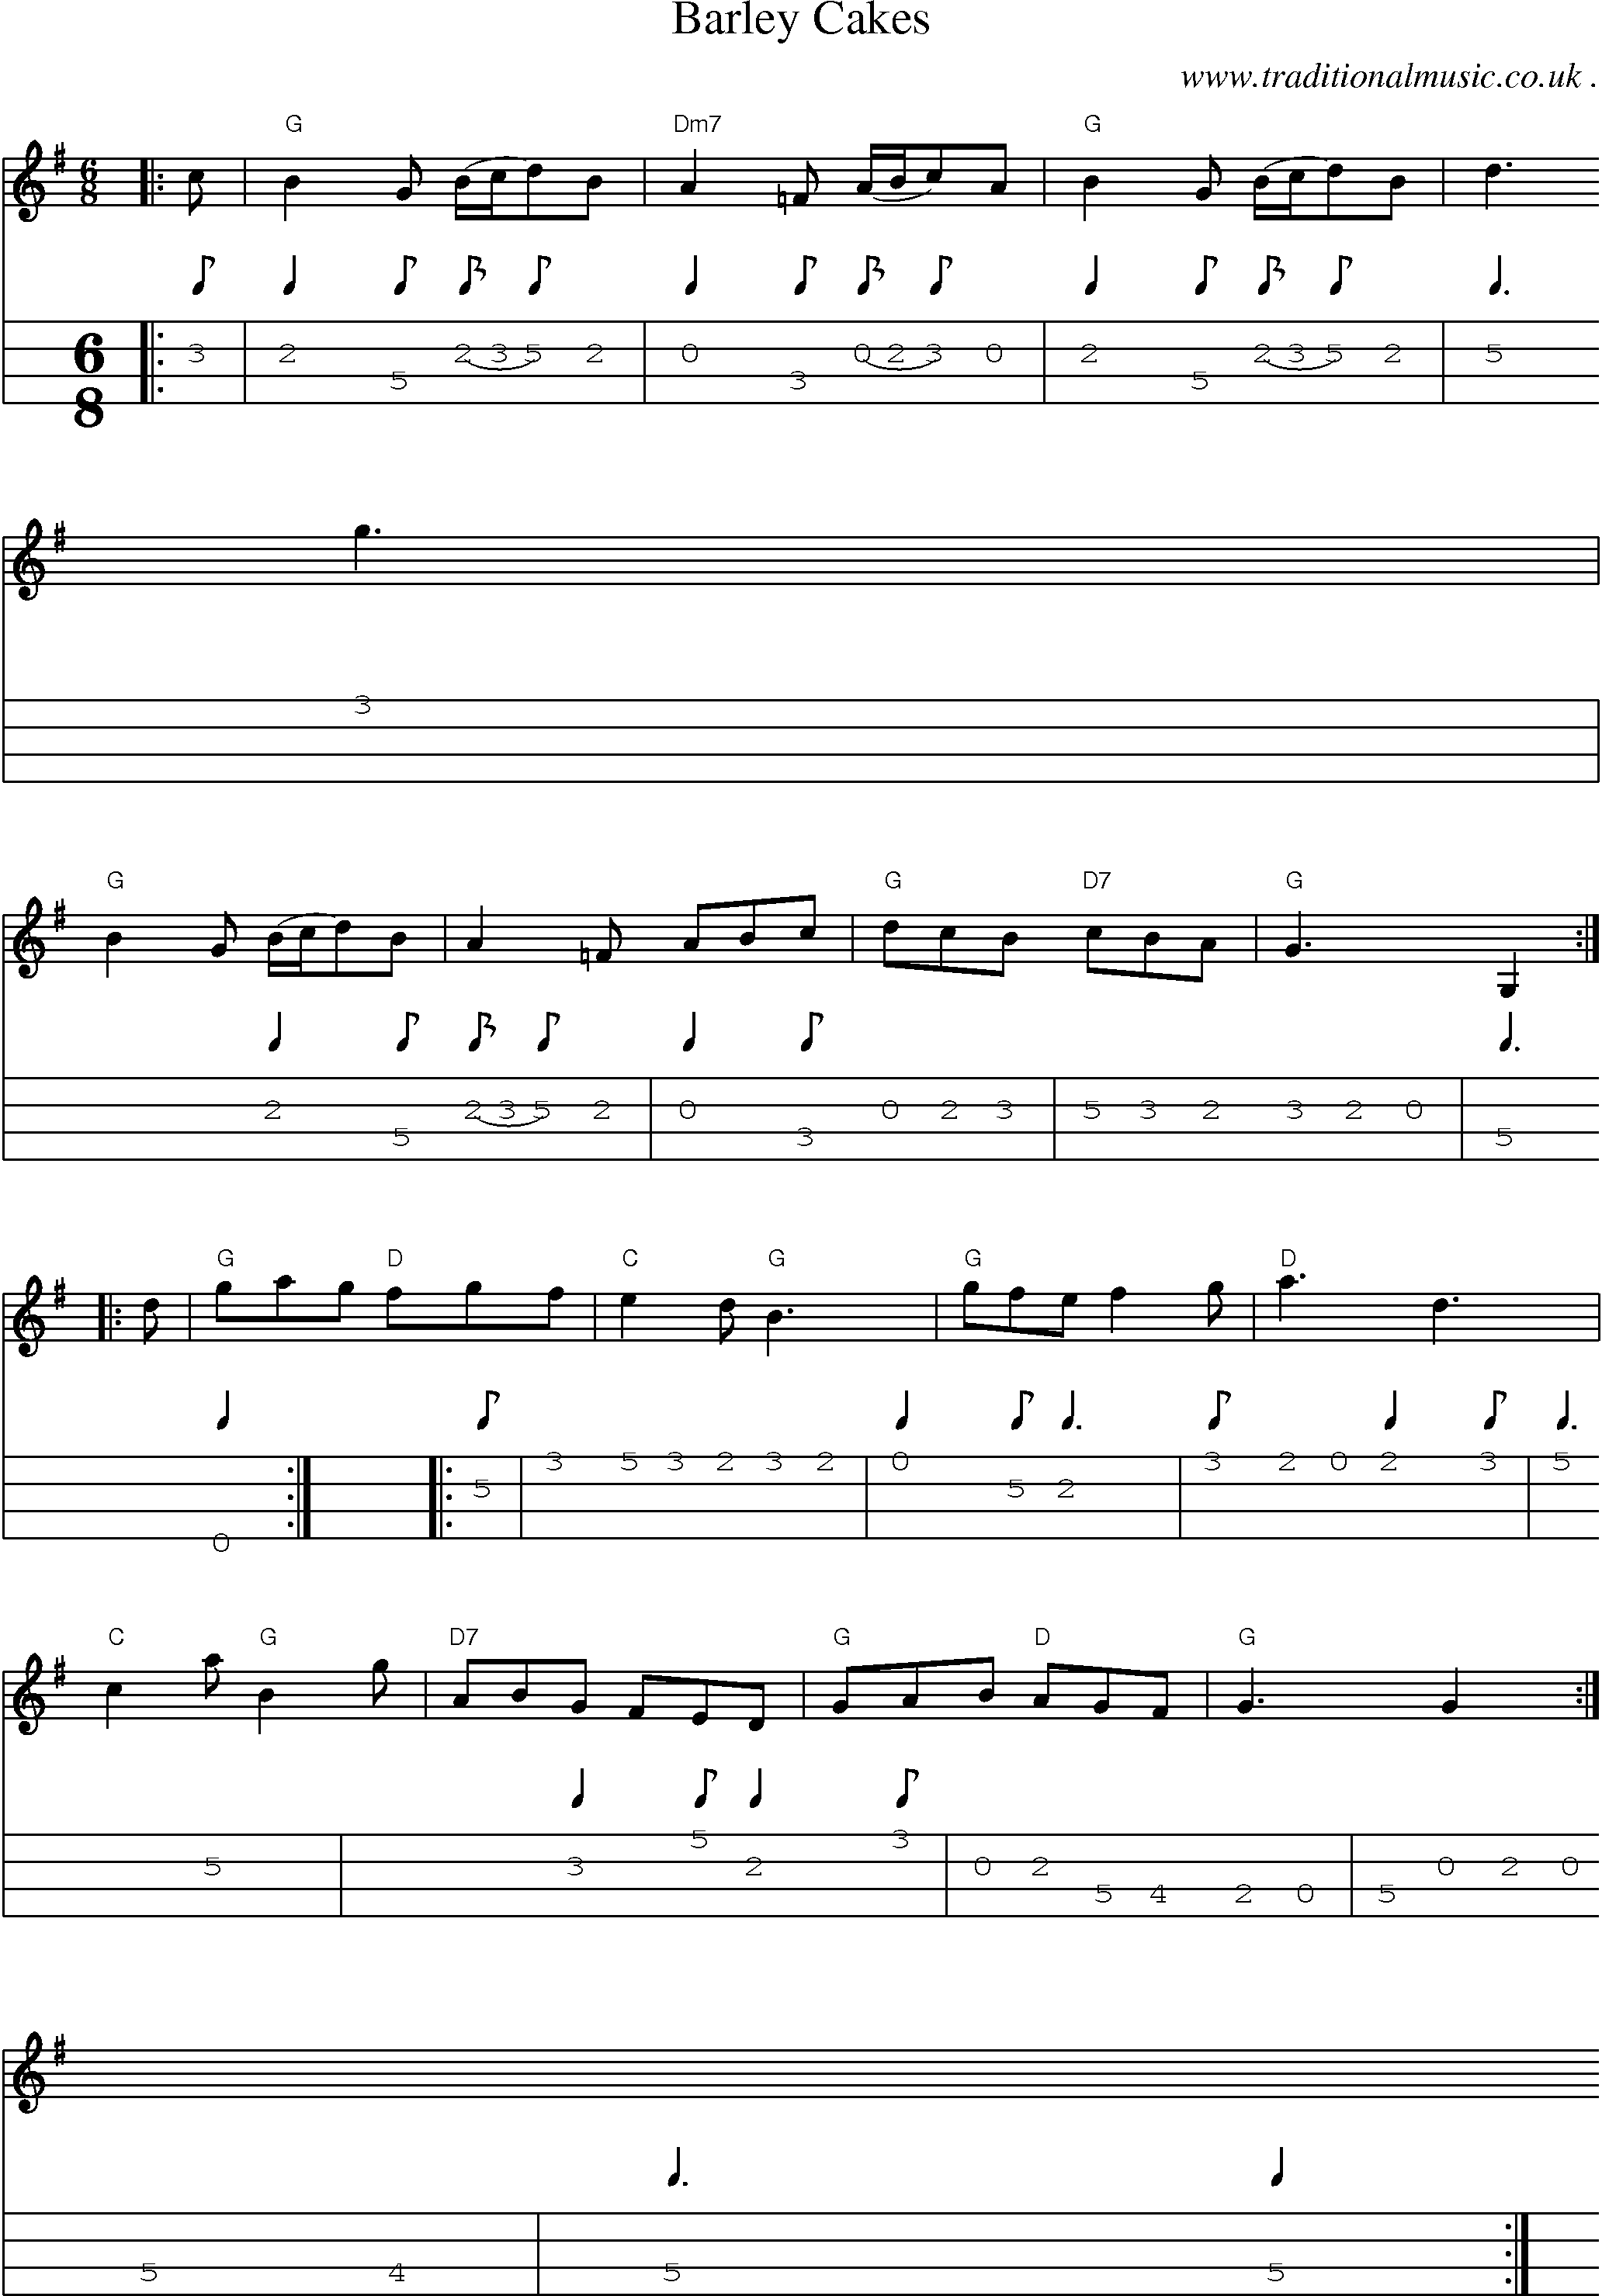 Sheet-music  score, Chords and Mandolin Tabs for Barley Cakes